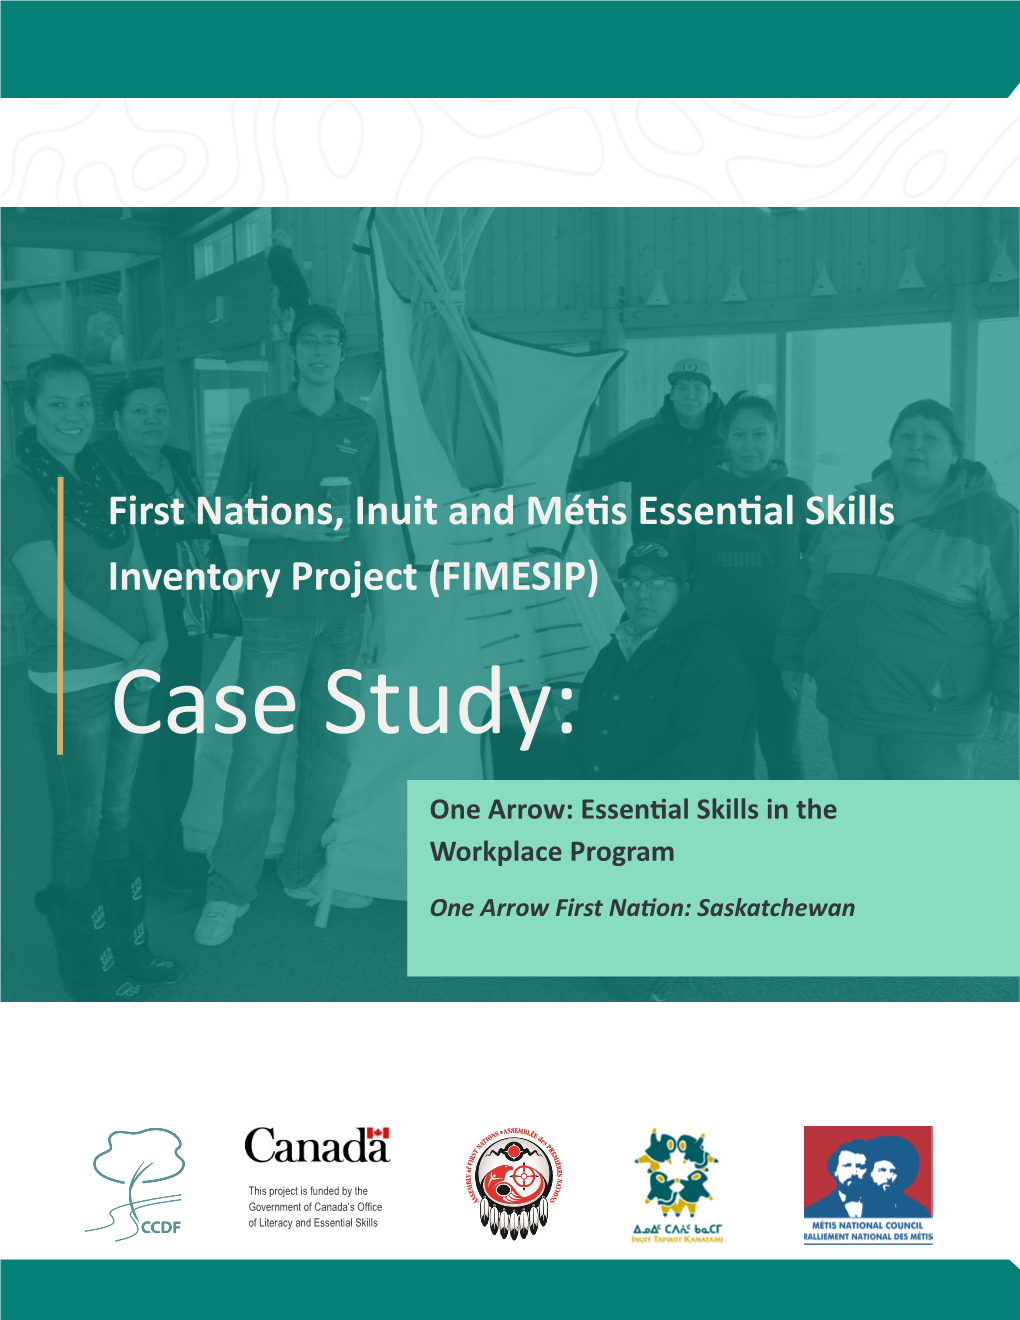 Case Study: One Arrow Essential Skills in the Workplace